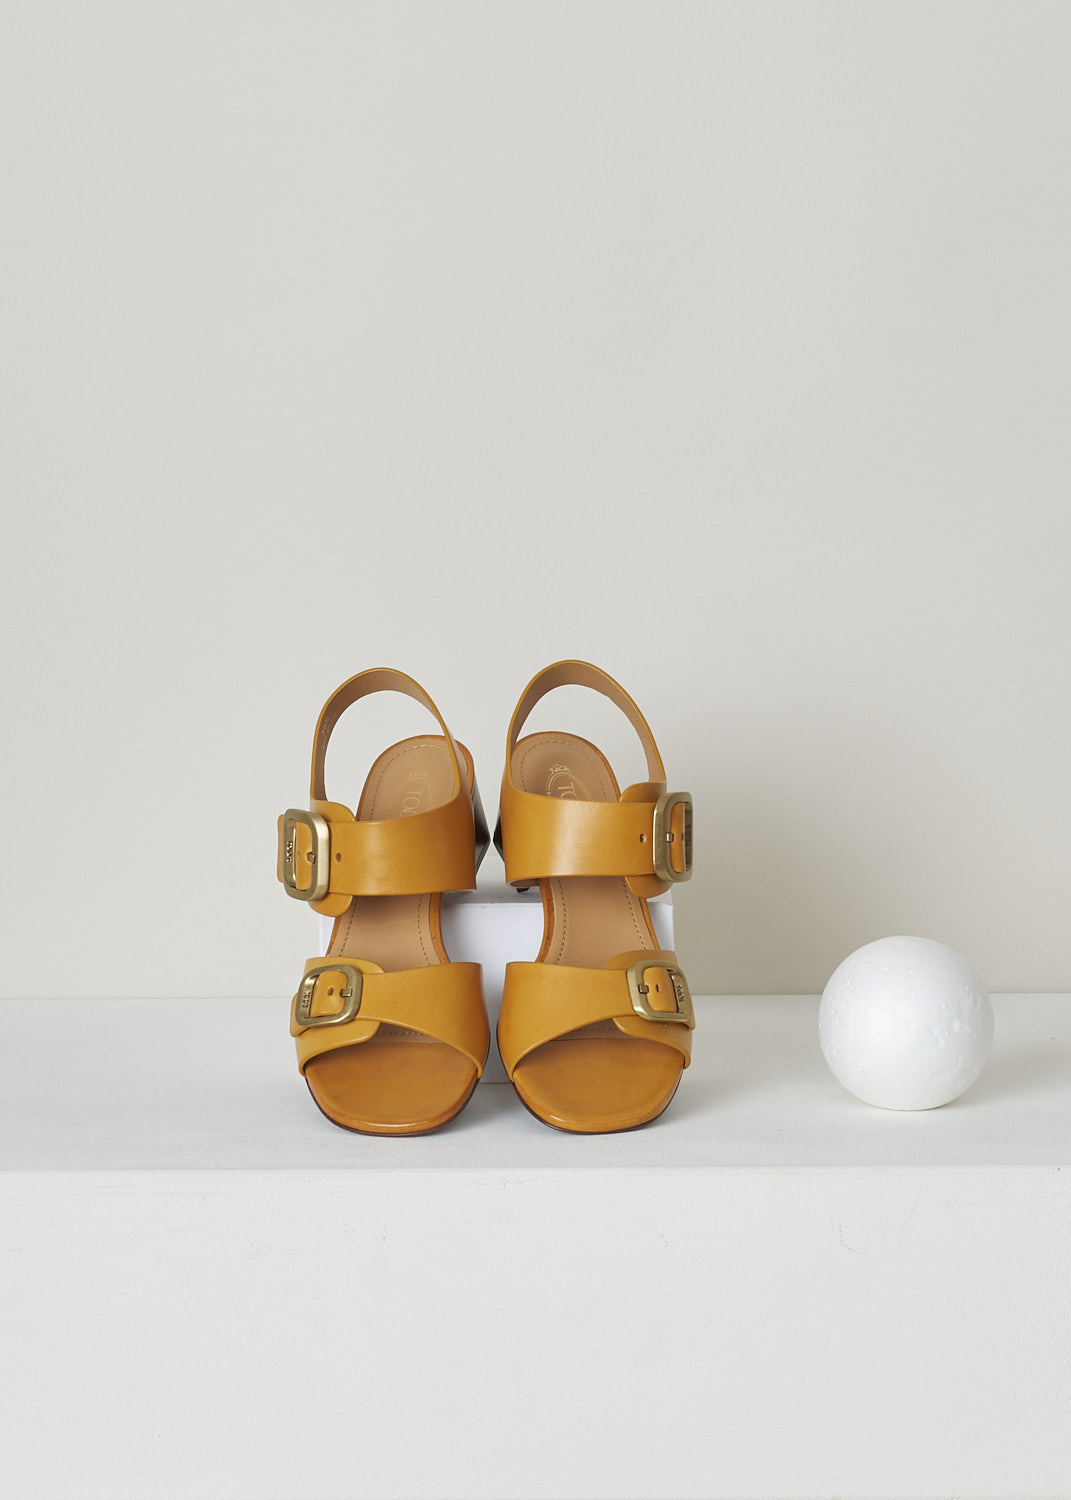 TODS, ORANGE BUCKLE SANDALS WITH HEEL, XXW04J0FH60NHVG816_SAND_CUOIO_MANDARINO, Orange, Yellow, Top, These orange heeled sandals have a double buckle-strap fastening with gold-toned buckles, a slingback strap and a squared open toe. 
